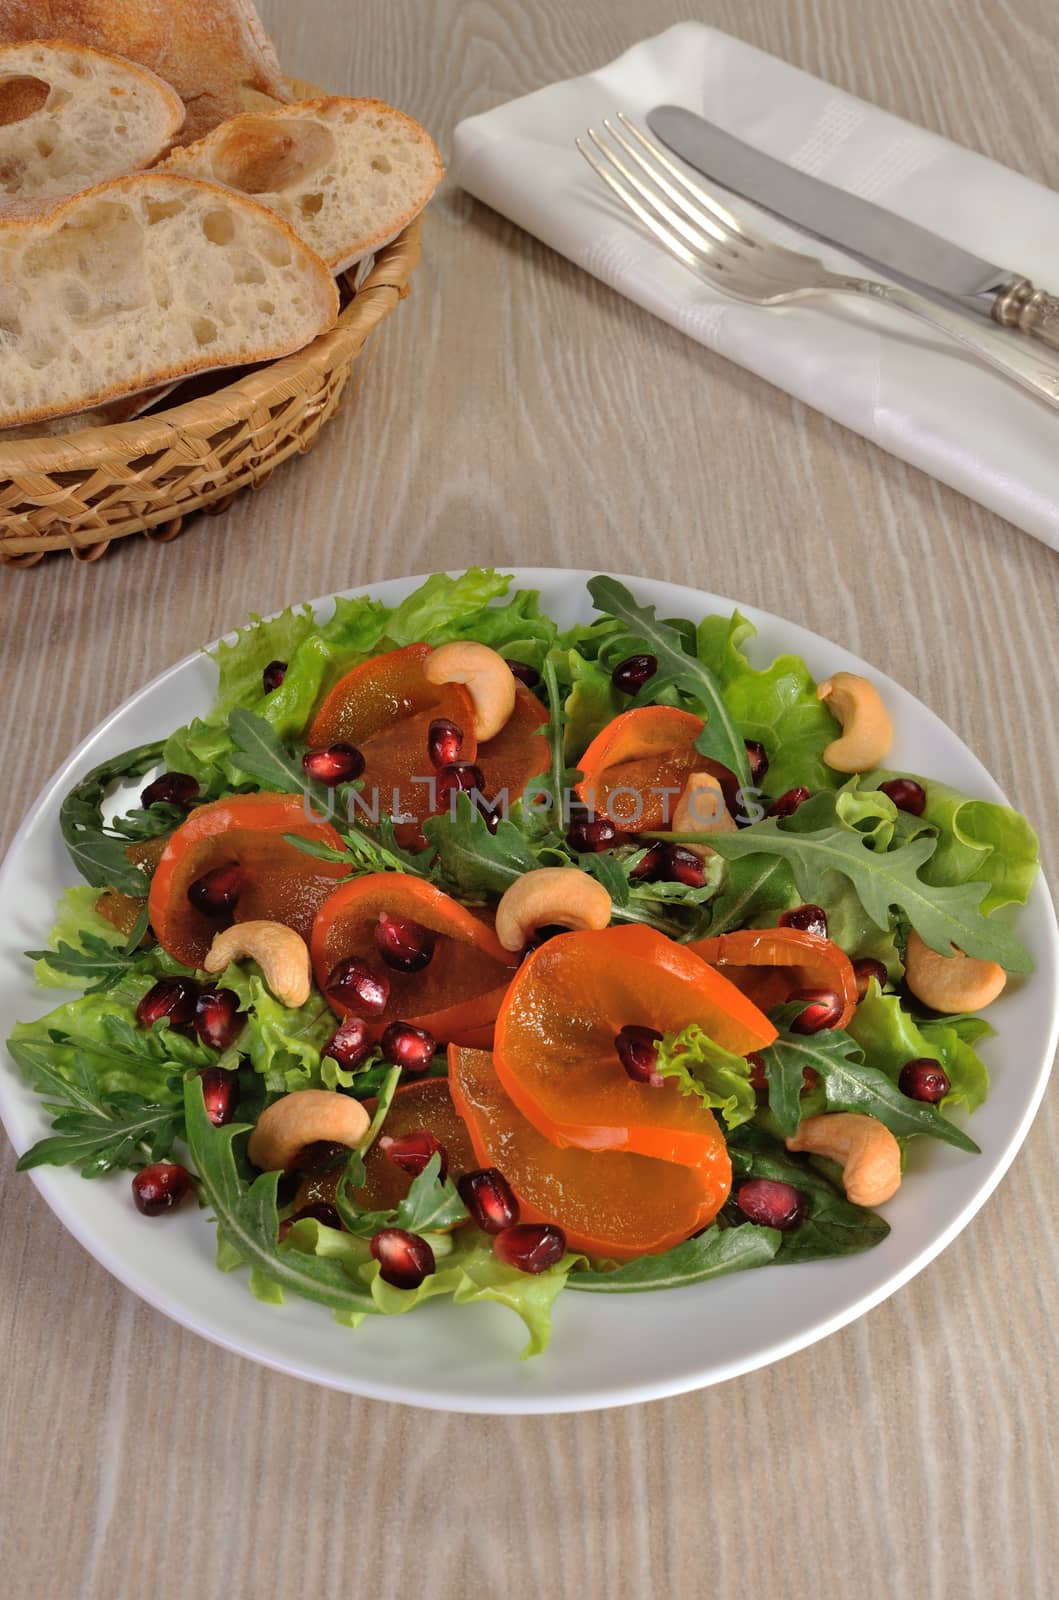 Salad greens with persimmon, pomegranate and cashews by Apolonia